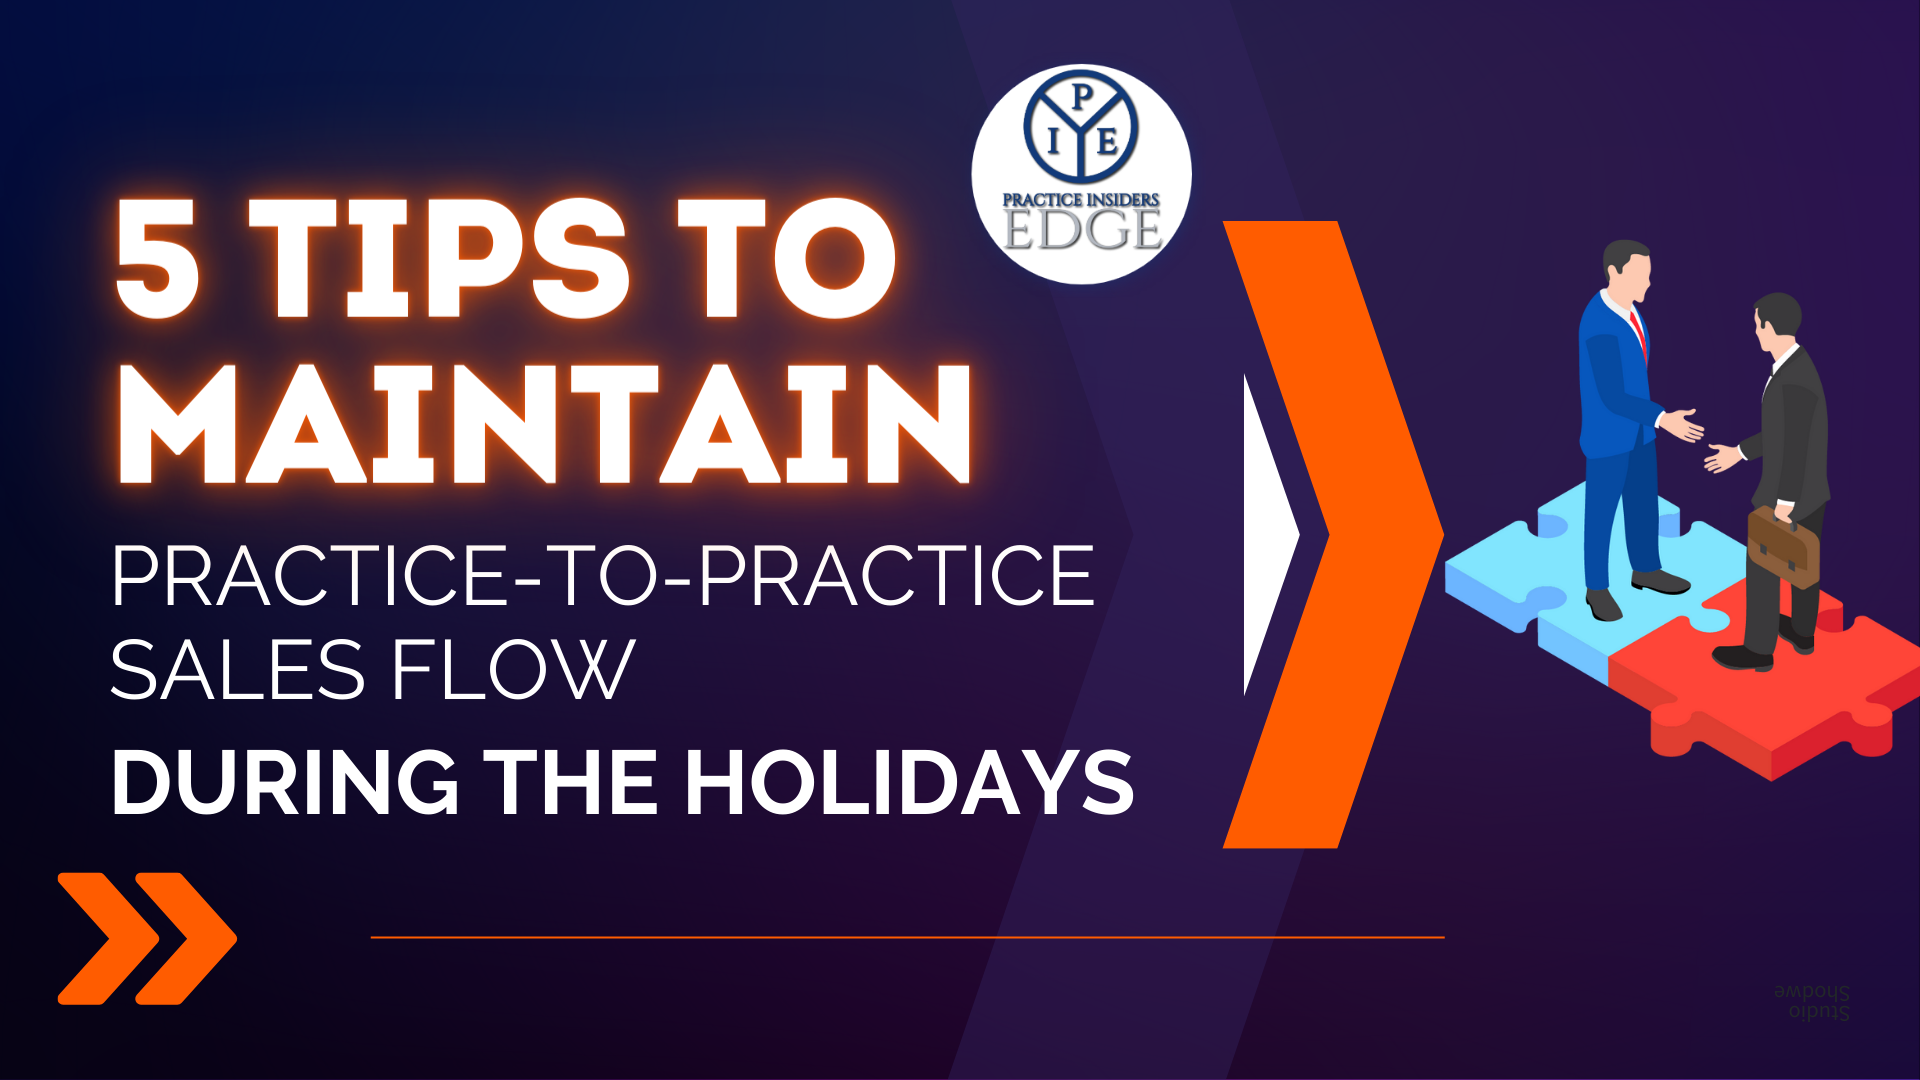 5 Tips to Maintain Practice-to-Practice Sales Flow During the Holidays